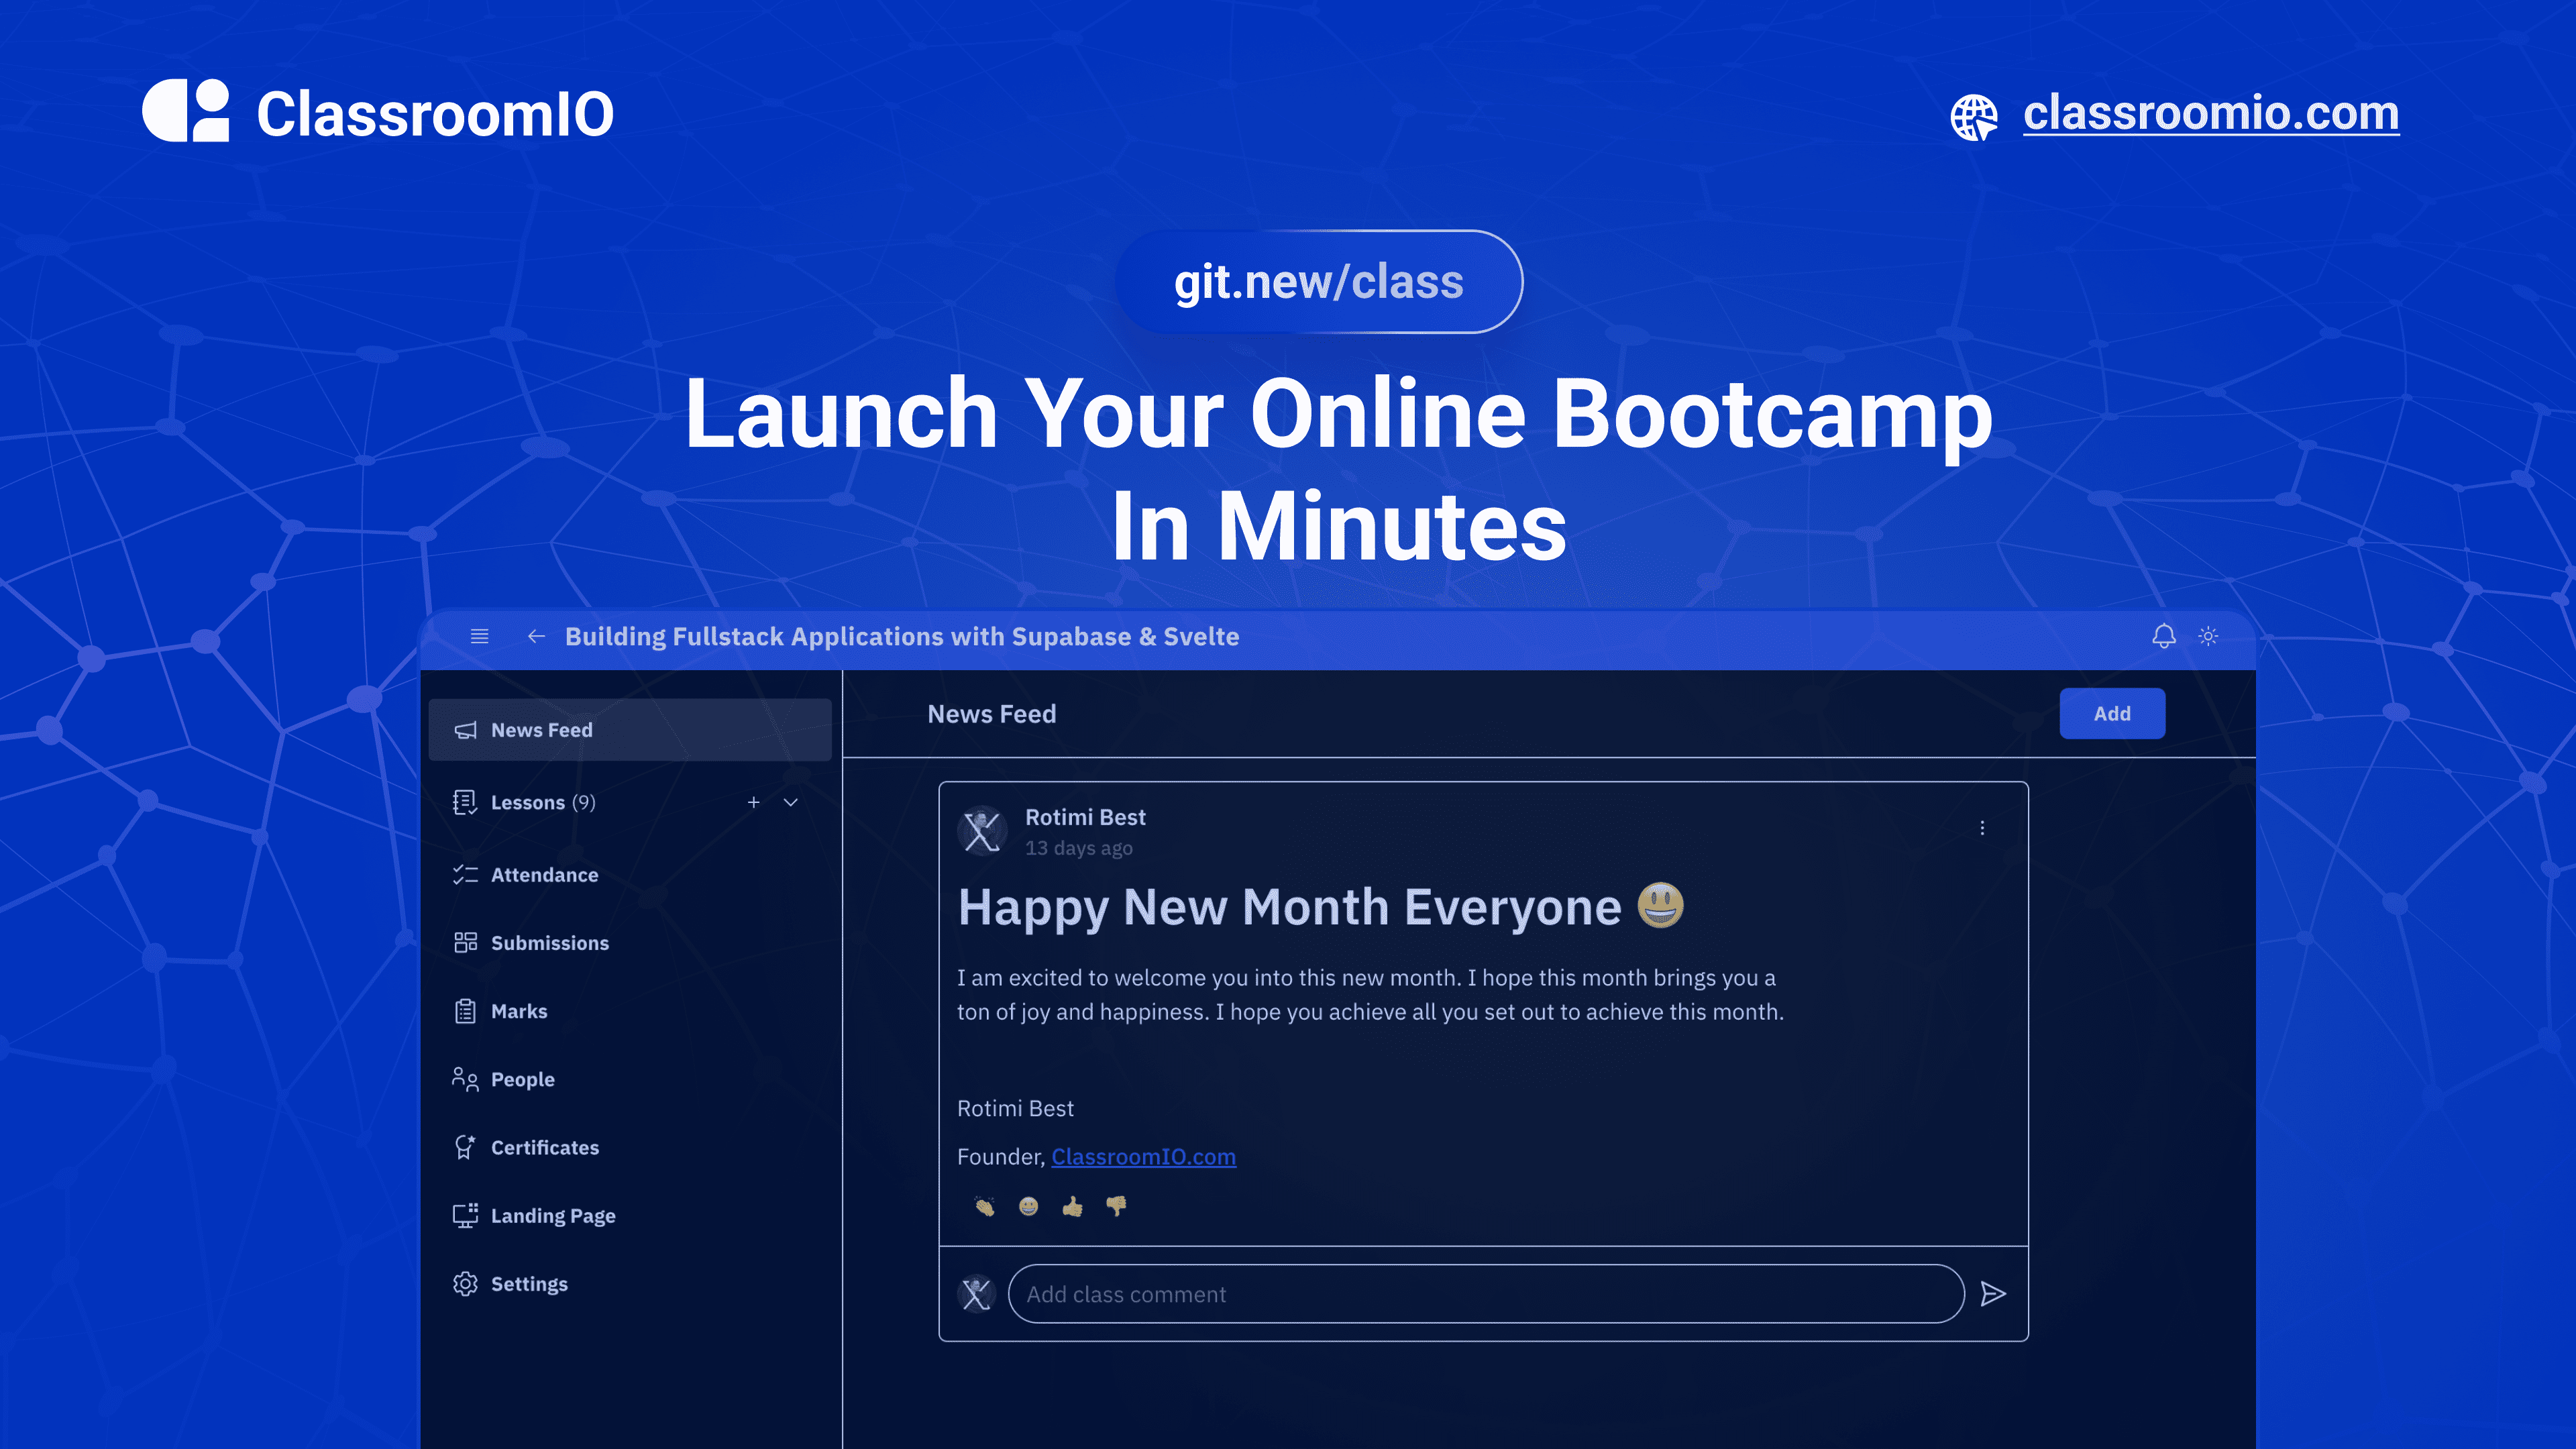 Launch your bootcamp quickly and affordably with ClassroomIO, the customizable online teaching platform.